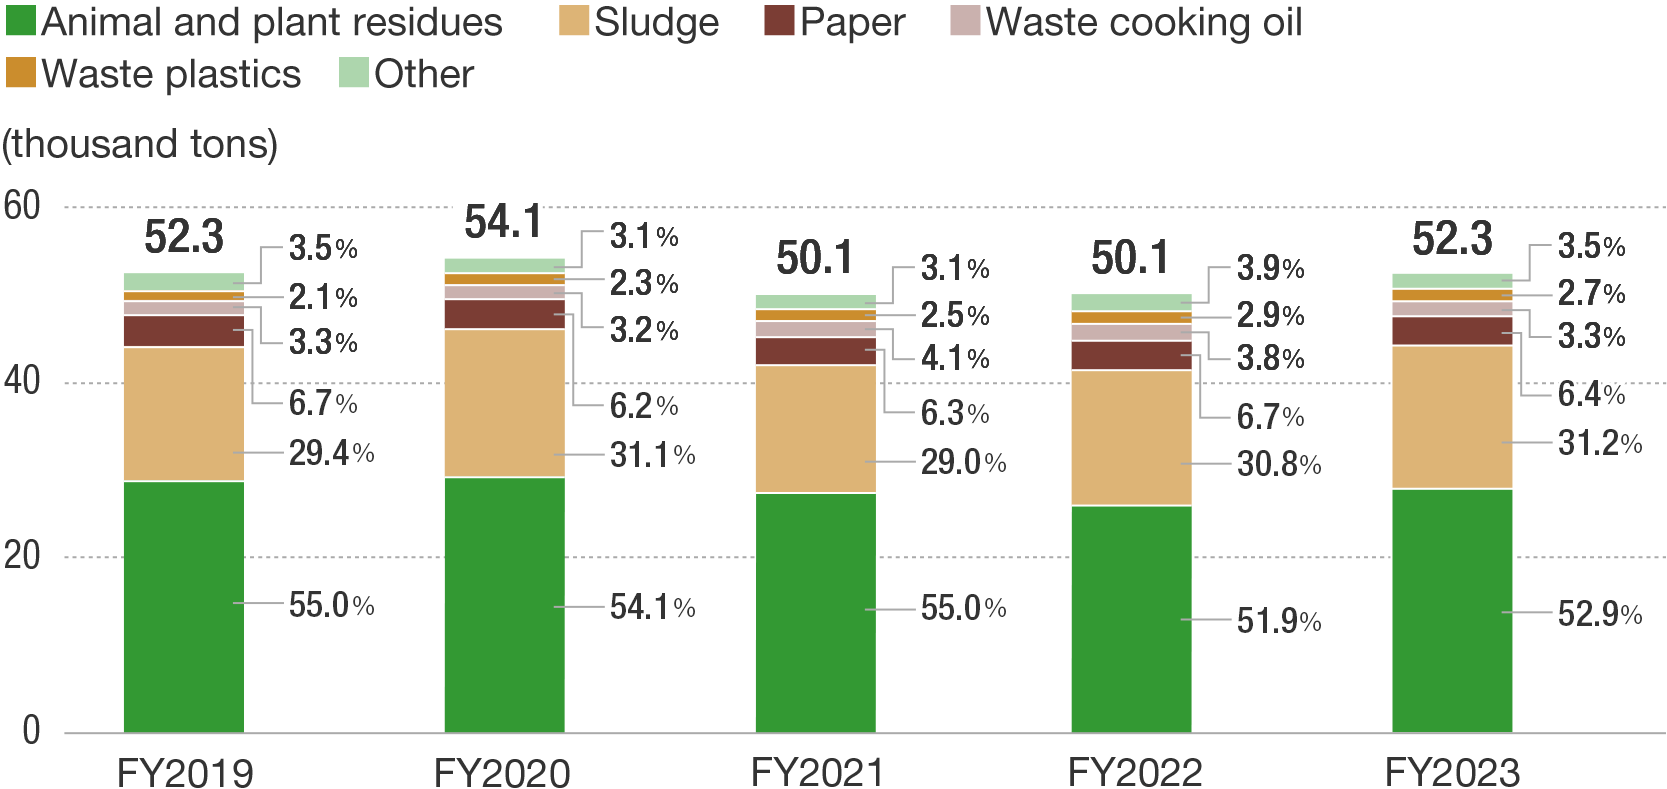 Changes in total waste volume over time